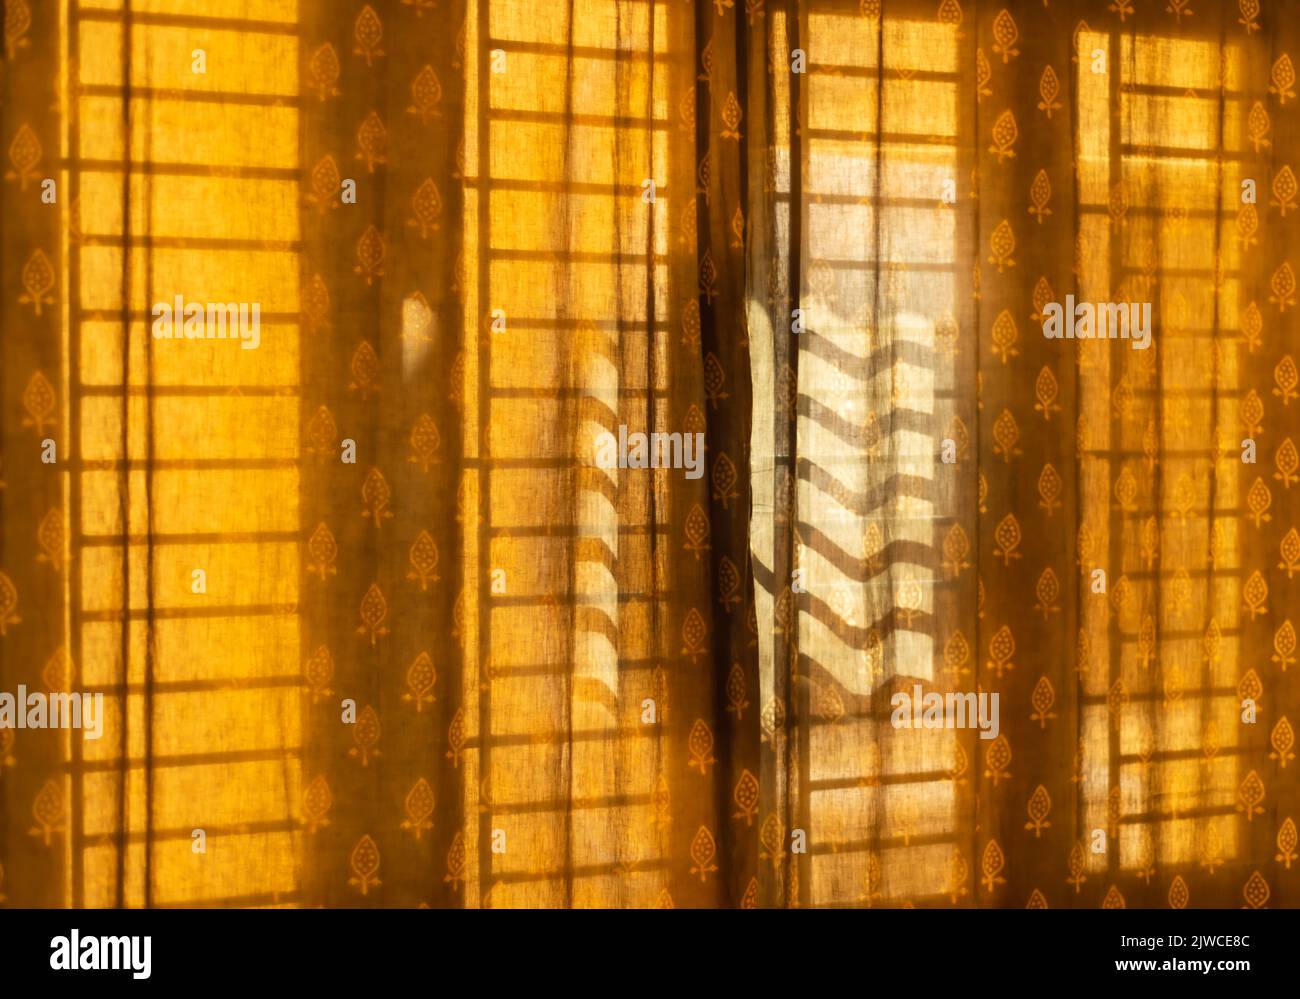 Morning sun casts a shadow of the window grille / grill on a curtain. Stock Photo